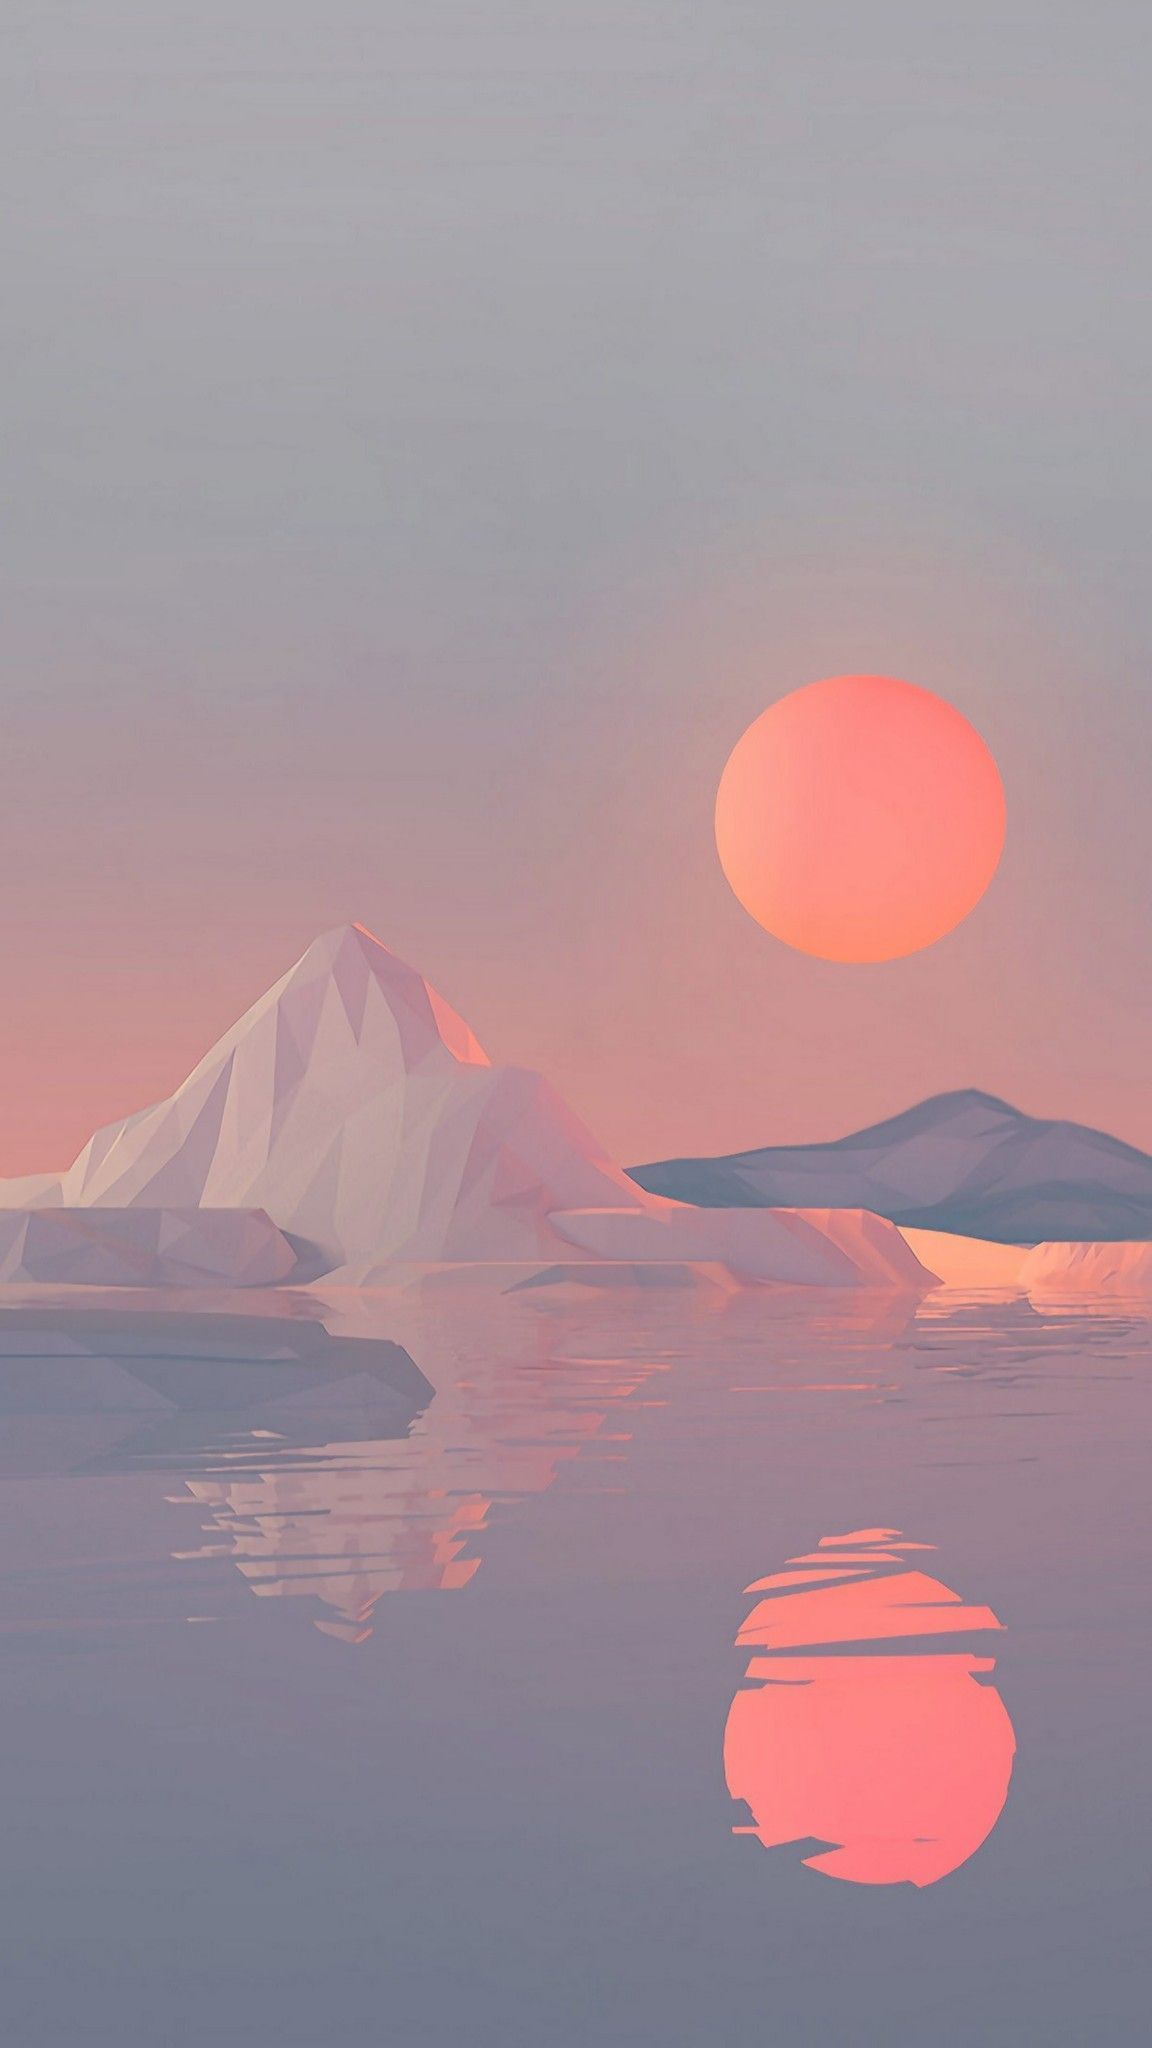 A sunset over an ocean with icebergs - Calming, scenery